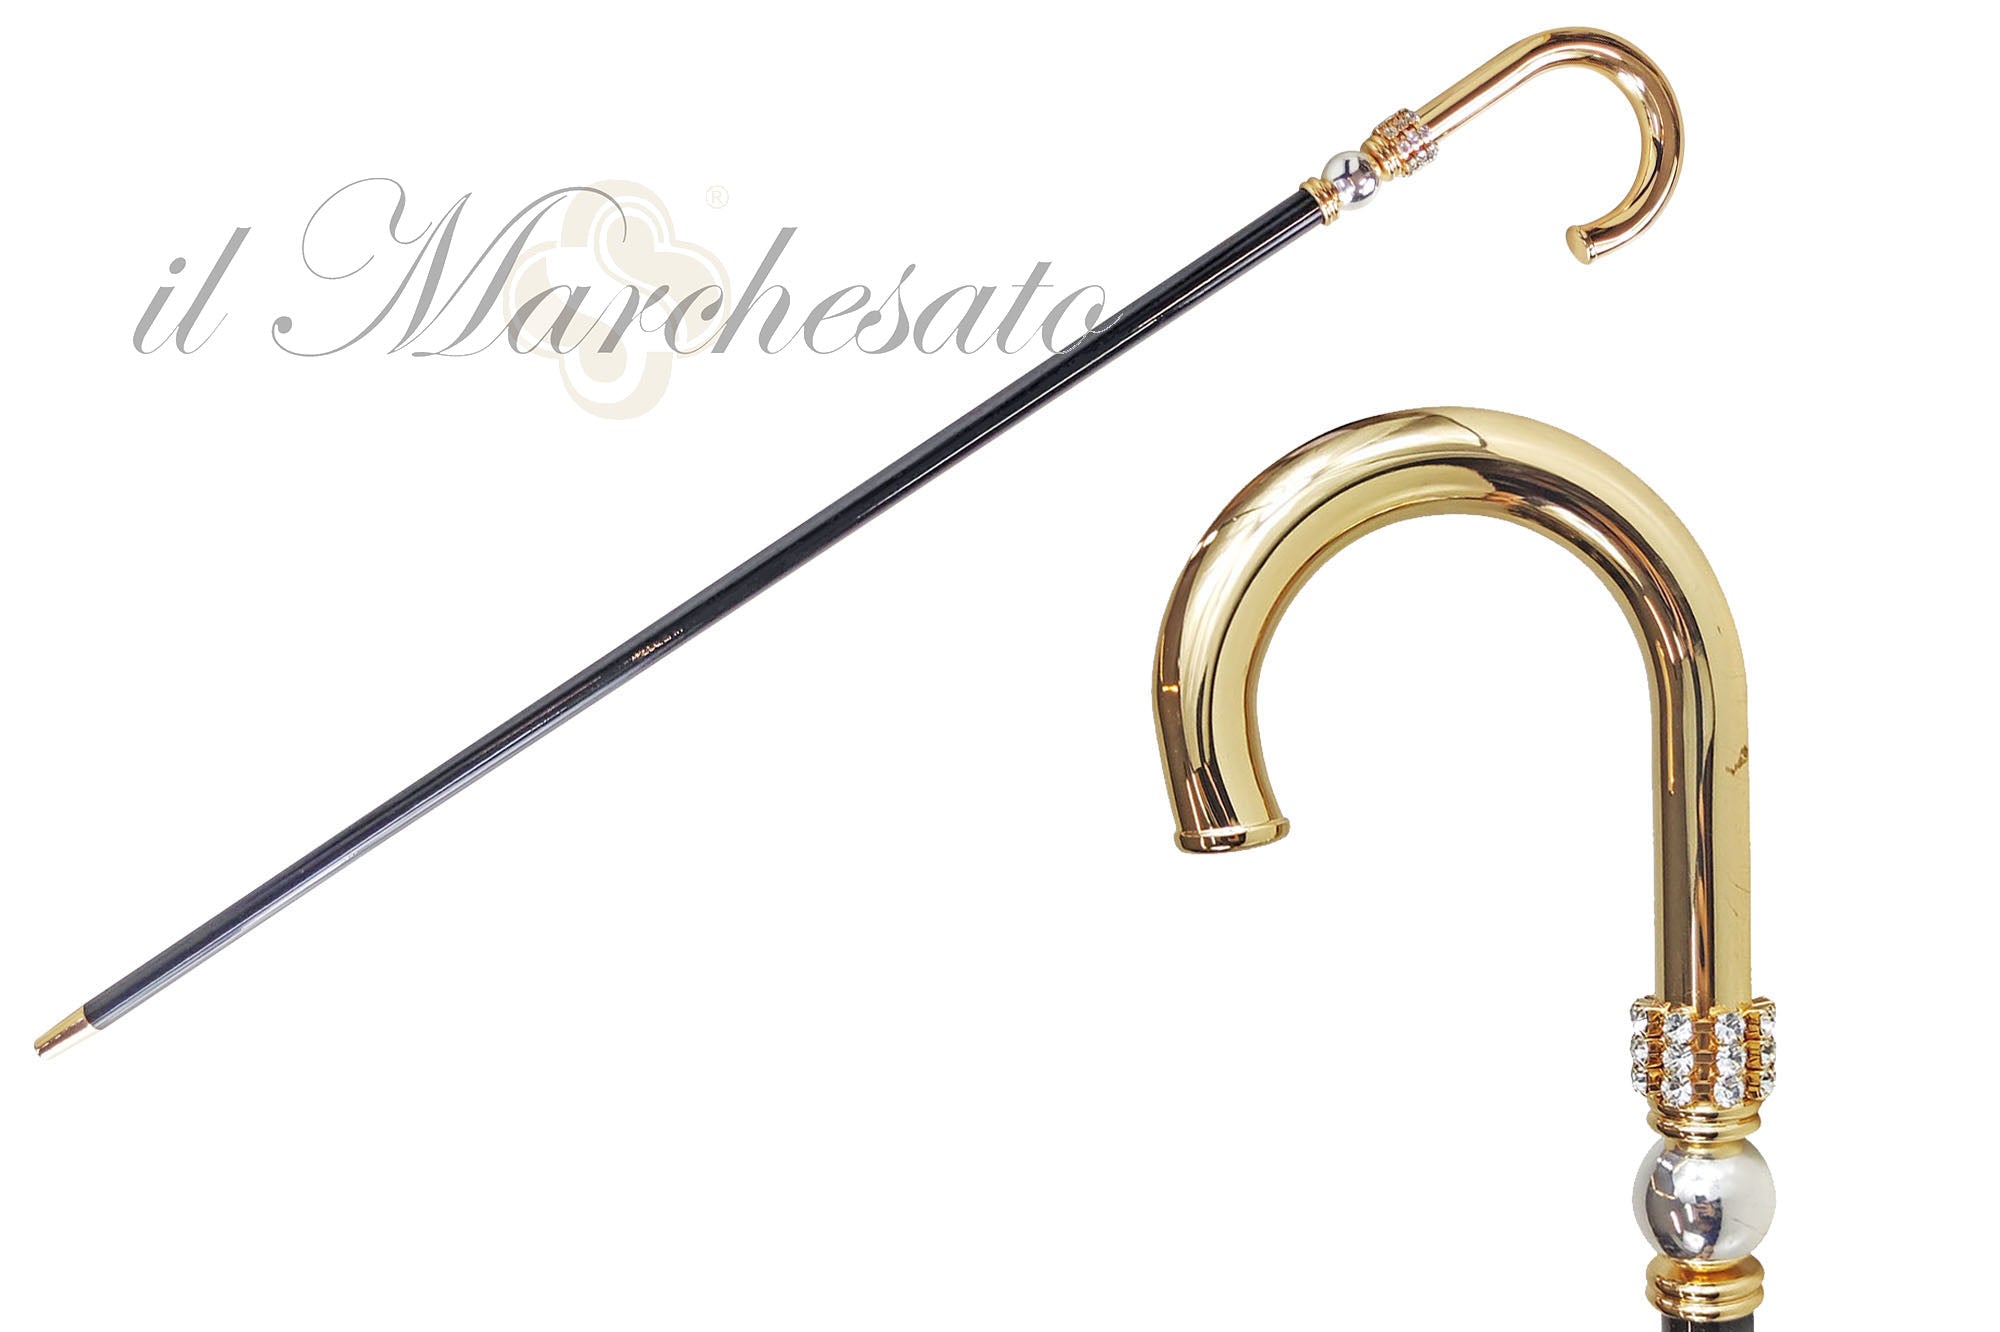 Walking stick for man in brass - 24K goldplated with Silverplated sphere